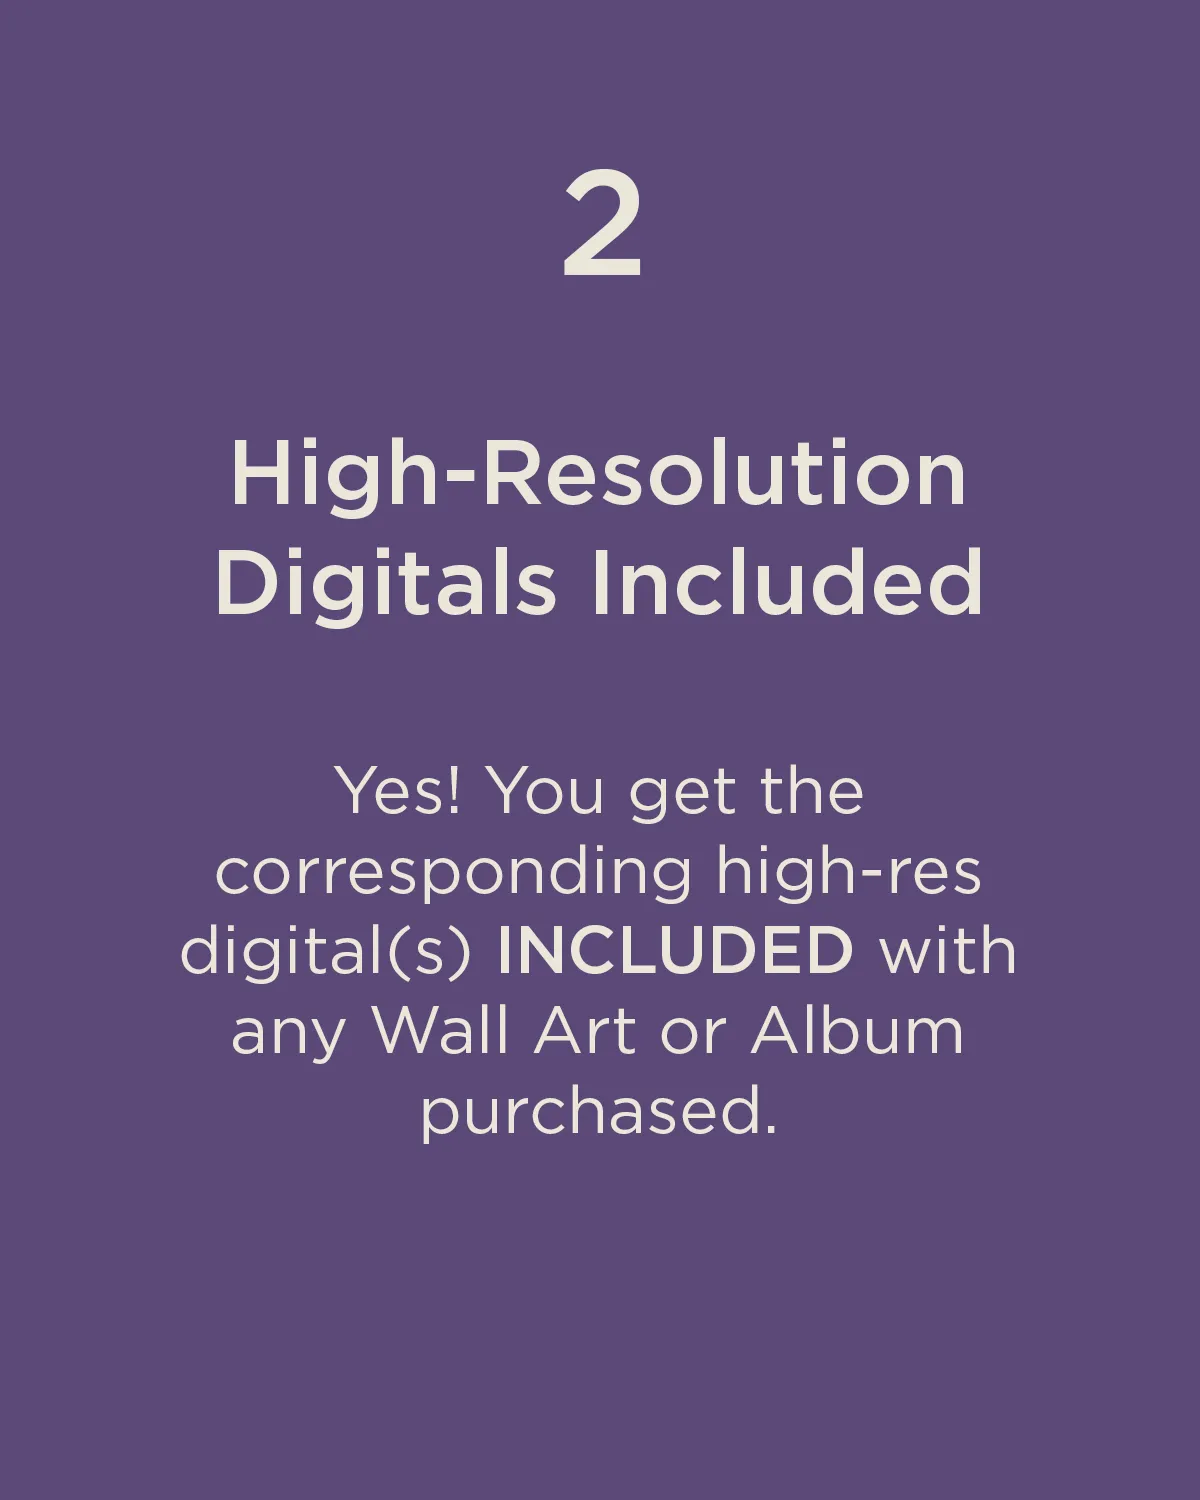 You get the high-resolution file with any piece of wall art or album purchased